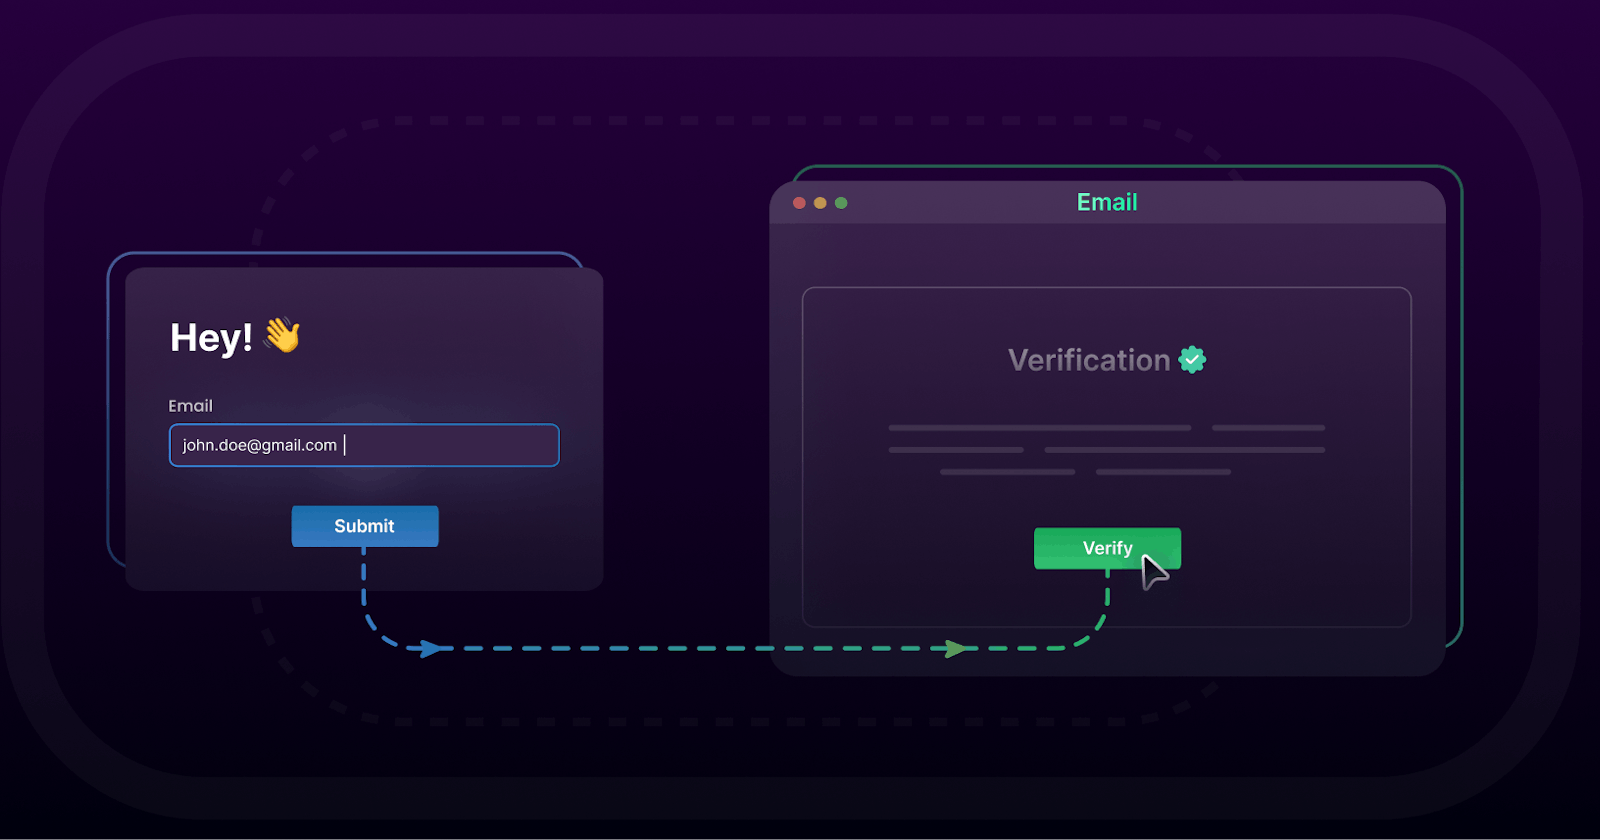 Implementing the right Email Verification flow